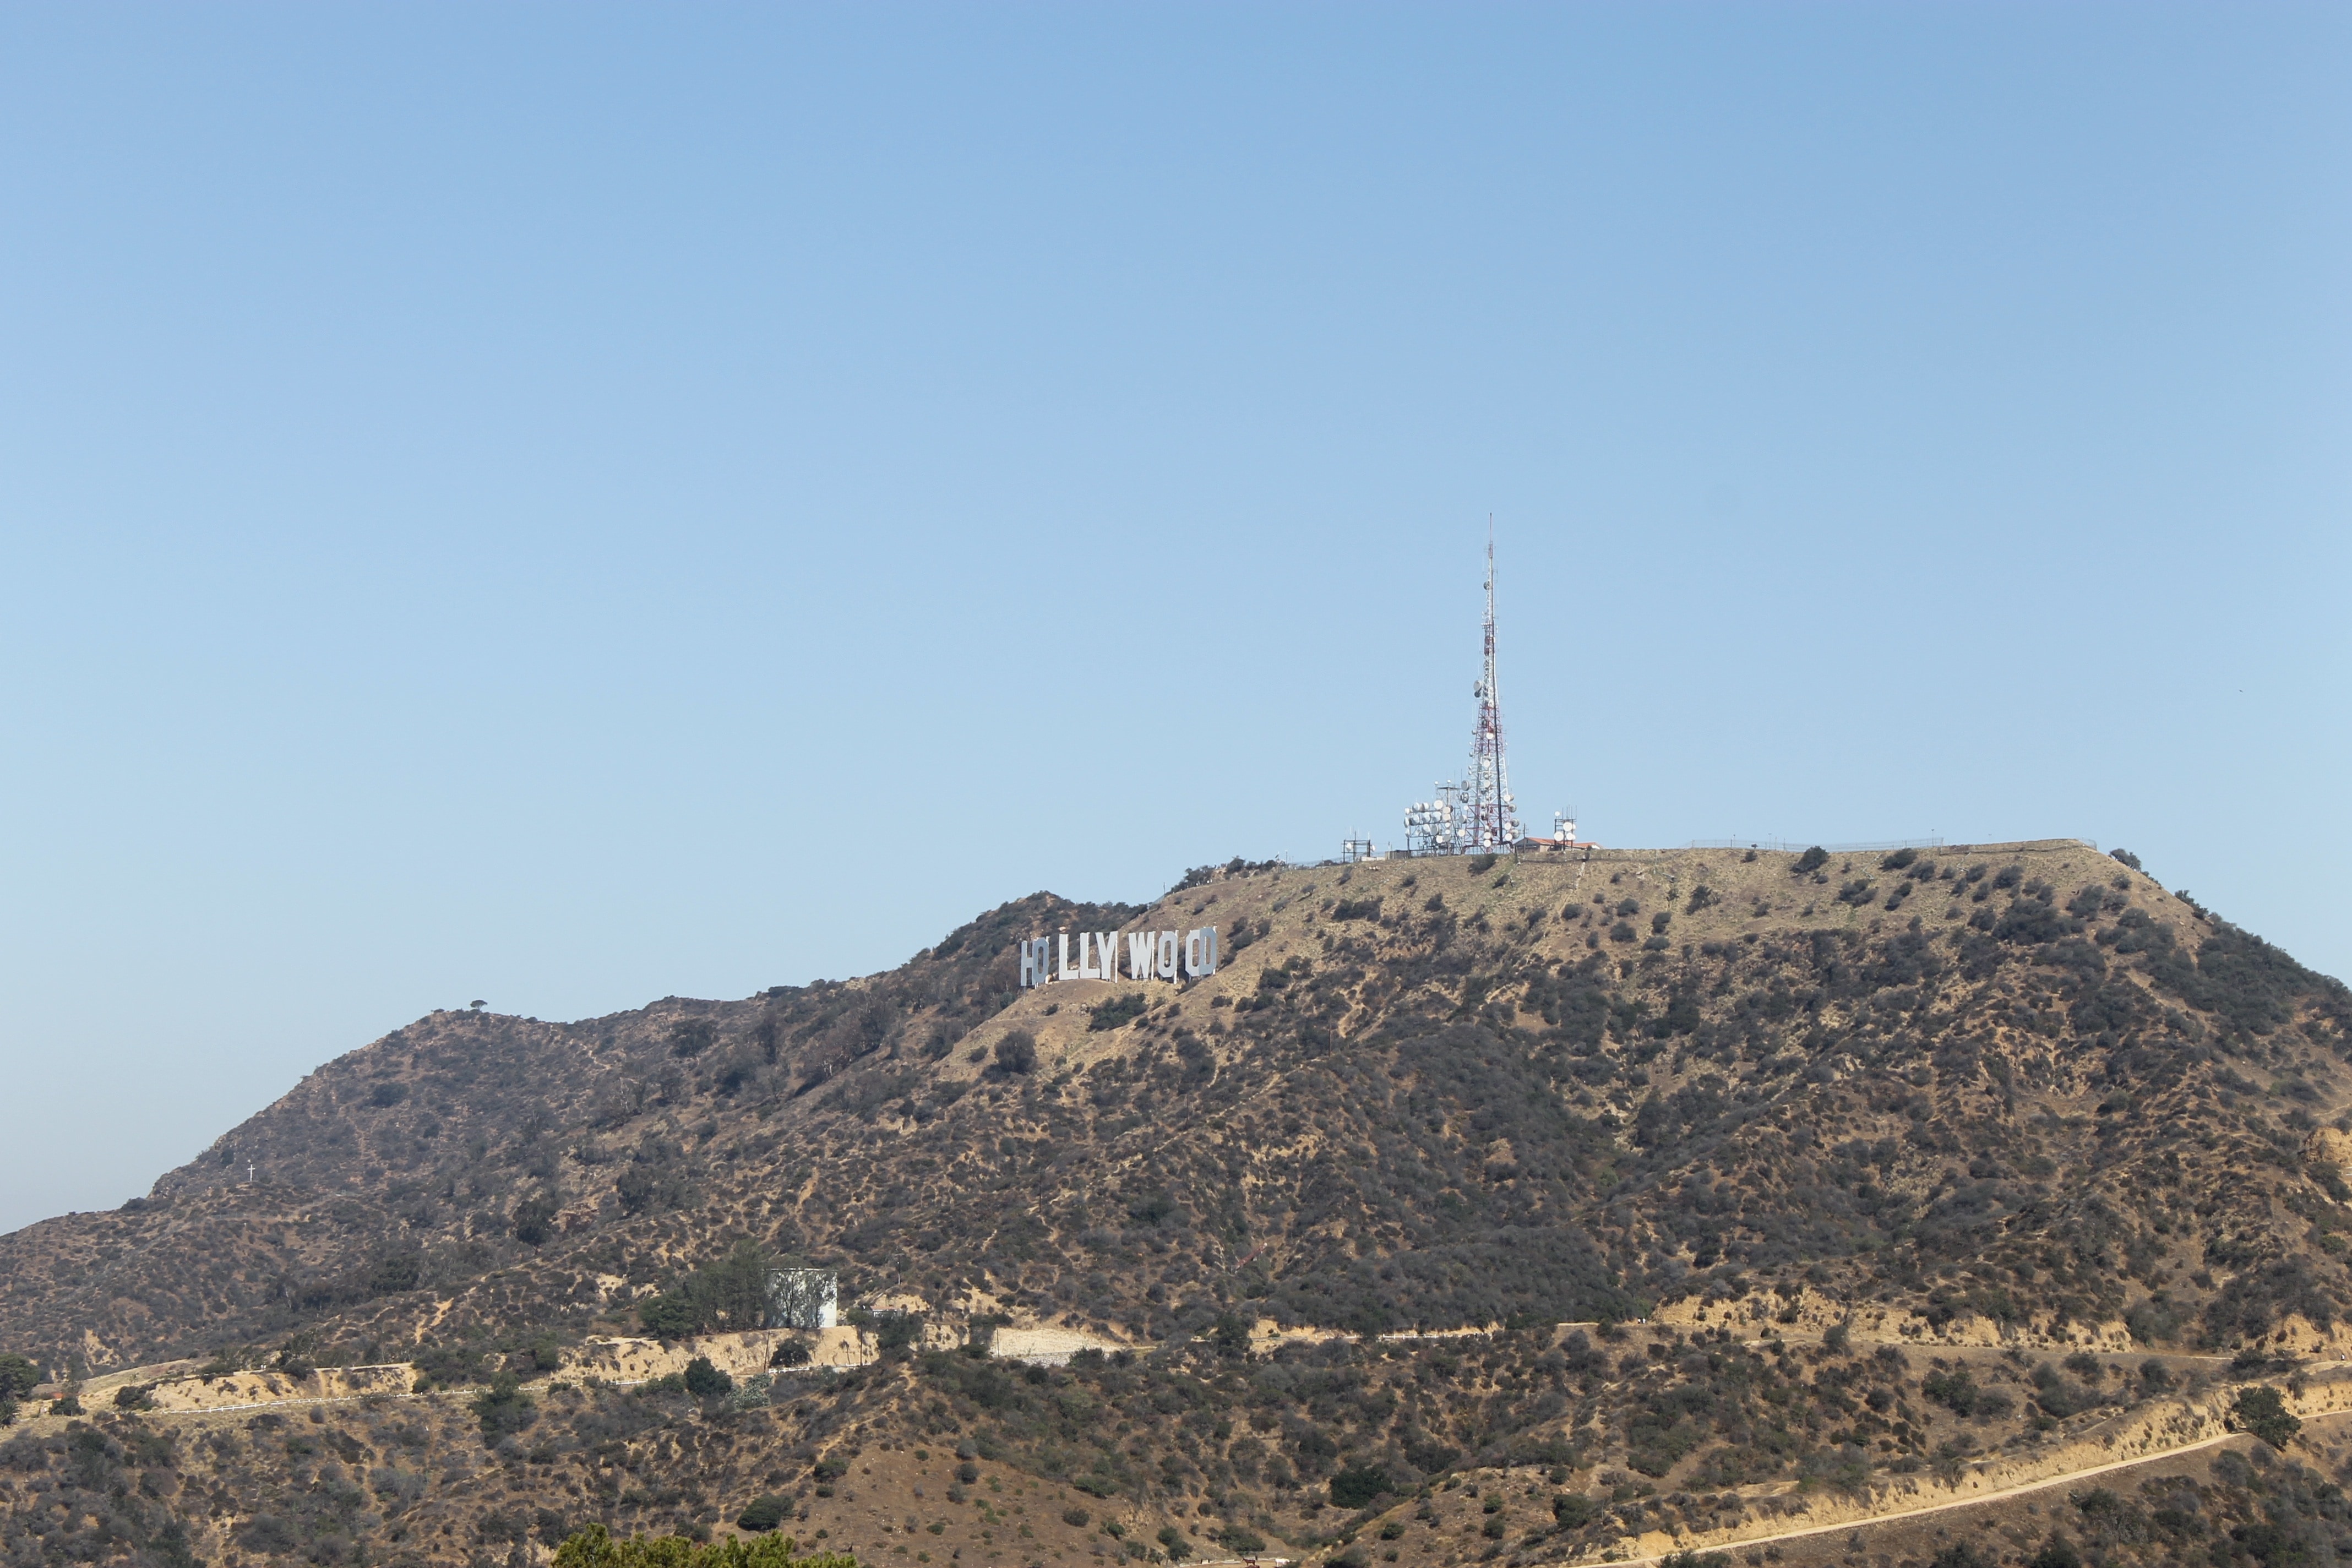 View, Hollywood, Angeles, City, mountain, no people